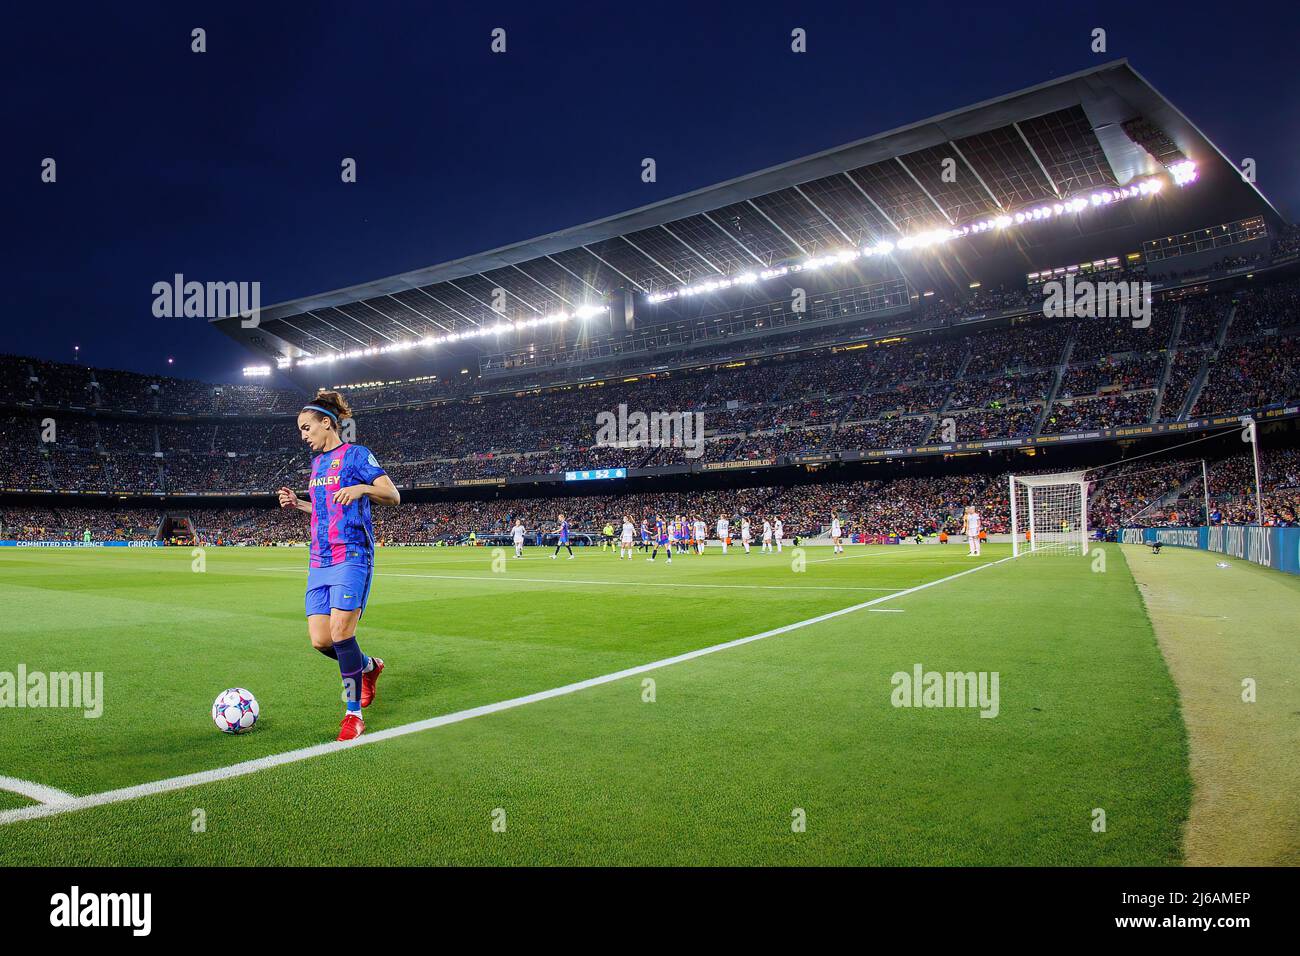 BARCELONA - MAR 30: Melanie Serrano in action during the UEFA Women's Champions League match between FC Barcelona and Real Madrid at the Camp Nou Stad Stock Photo